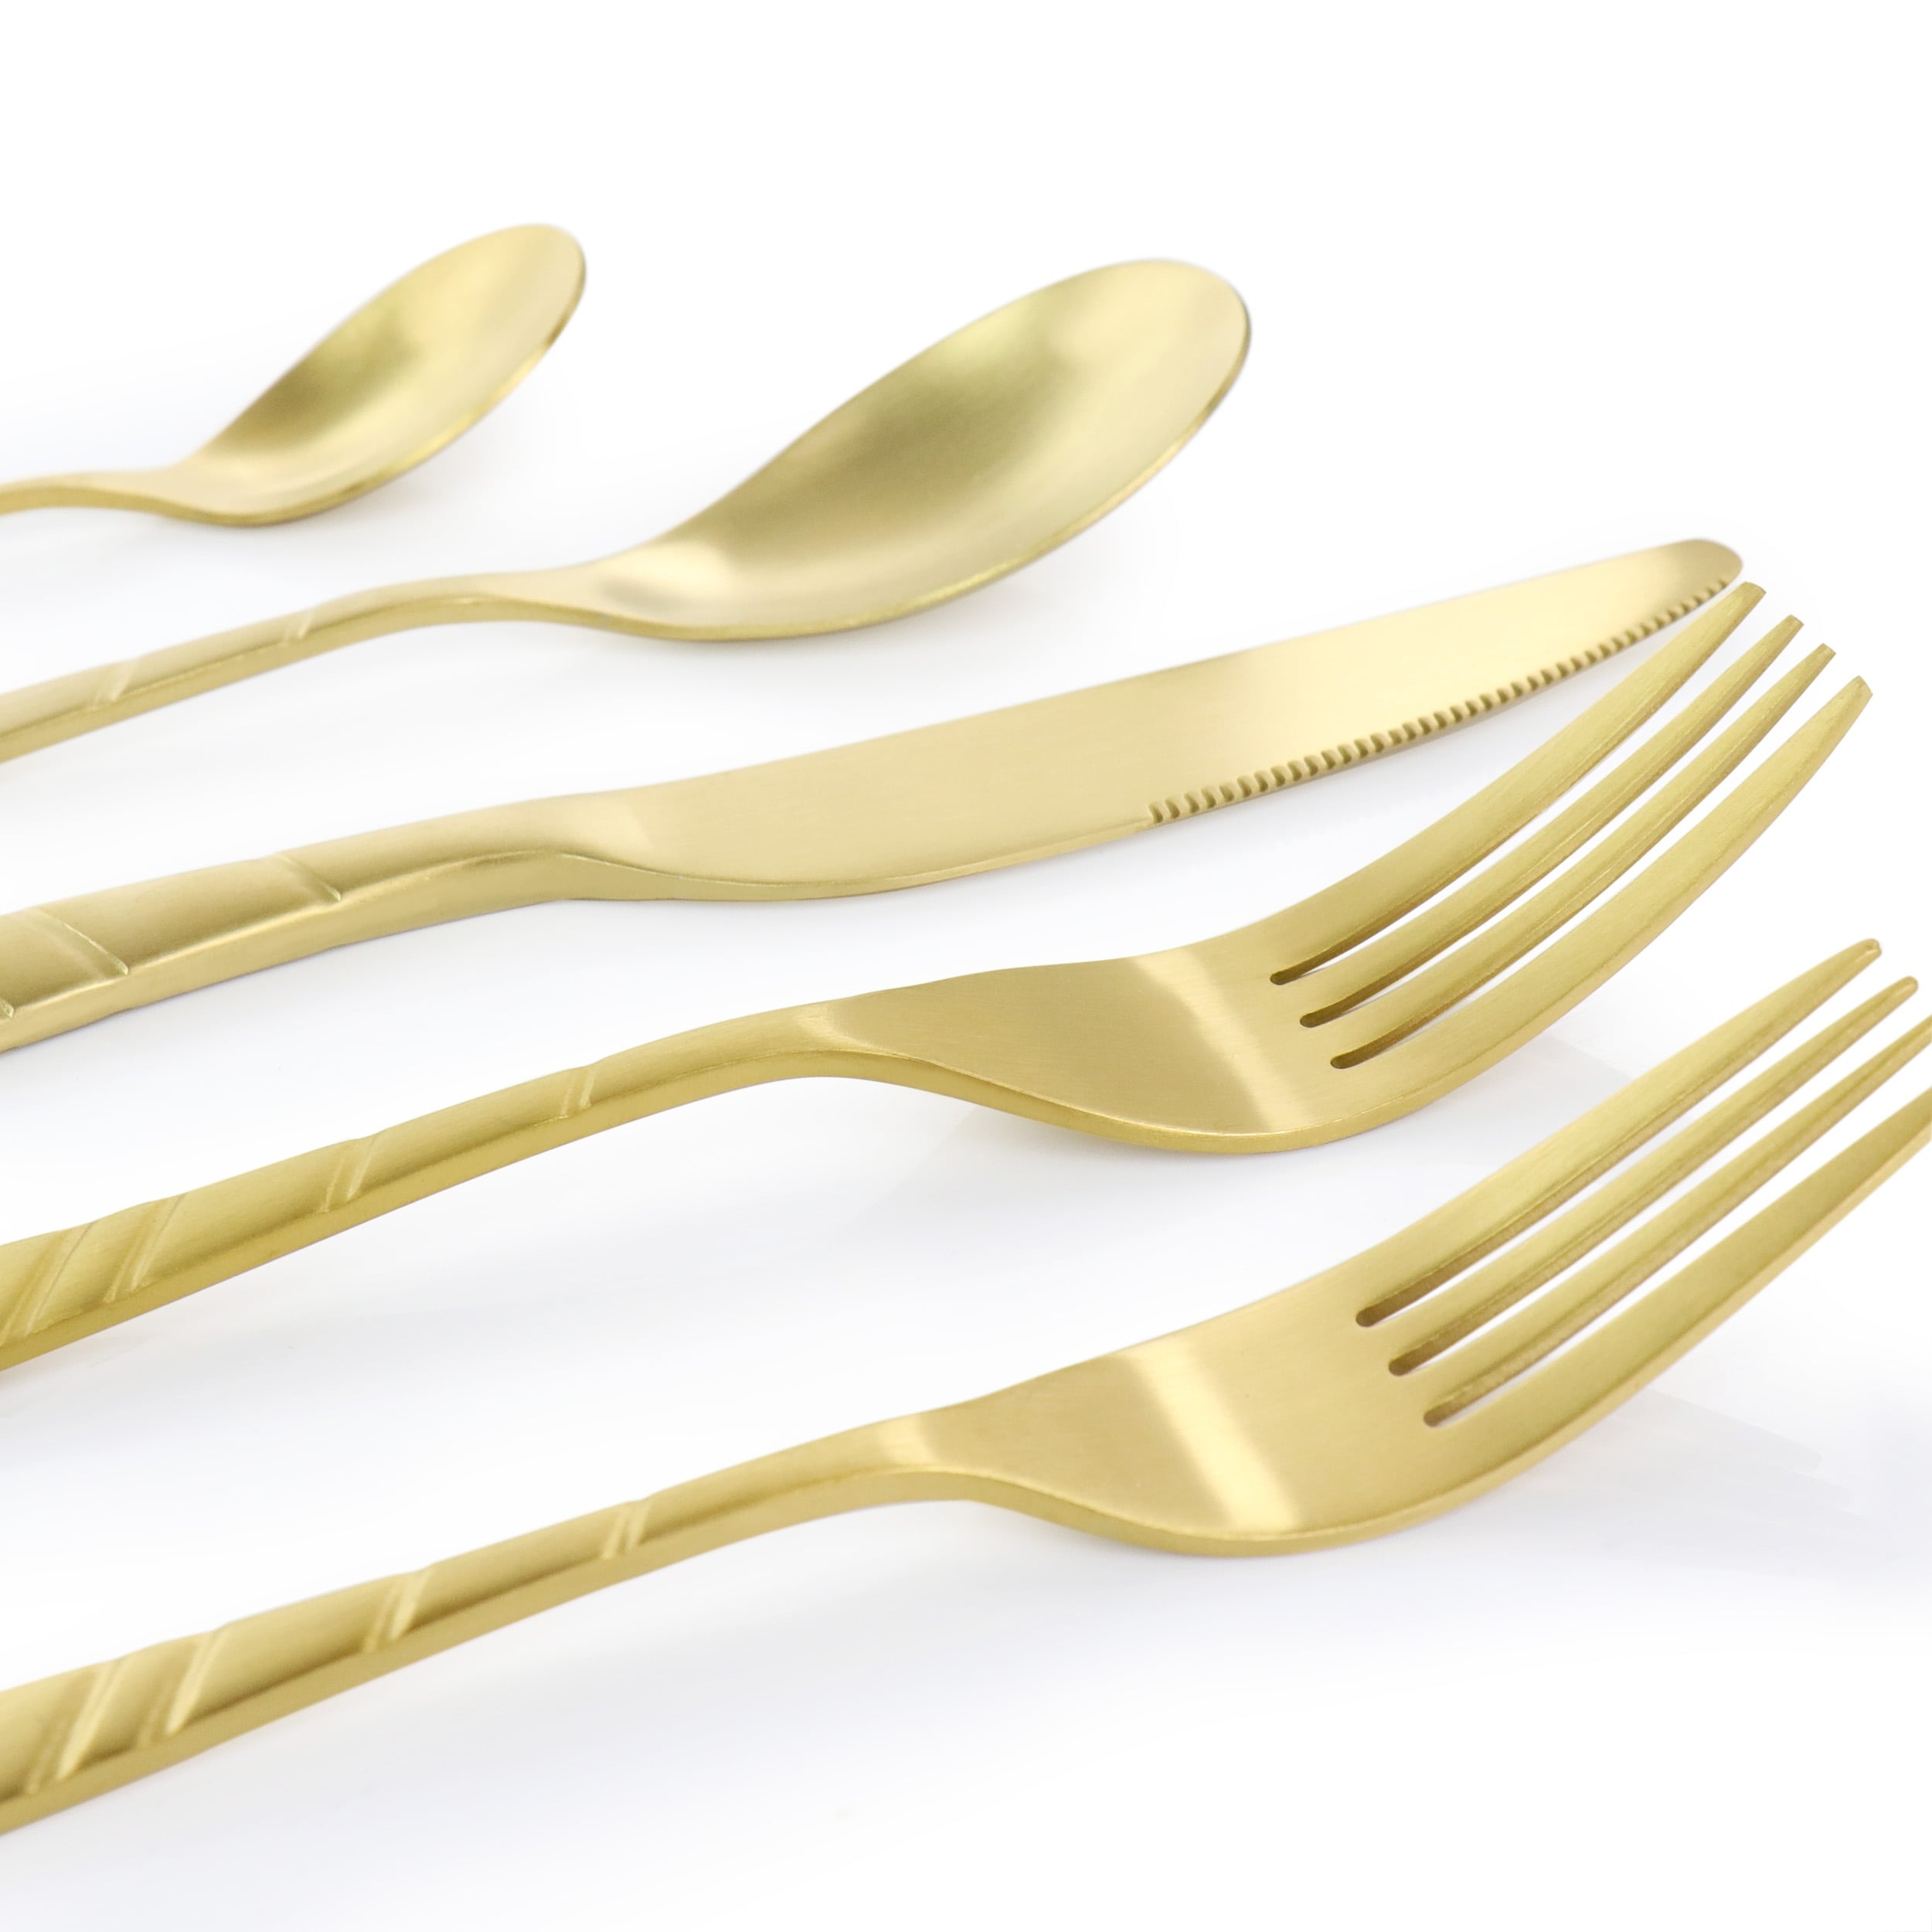 https://ak1.ostkcdn.com/images/products/is/images/direct/f22c5cb3e2450a10369c5ce40913fb2c706b4a62/Megachef-La-Vague-20pc-Flatware-Utensil-Set-Service-for-4-Matte-Gold.jpg